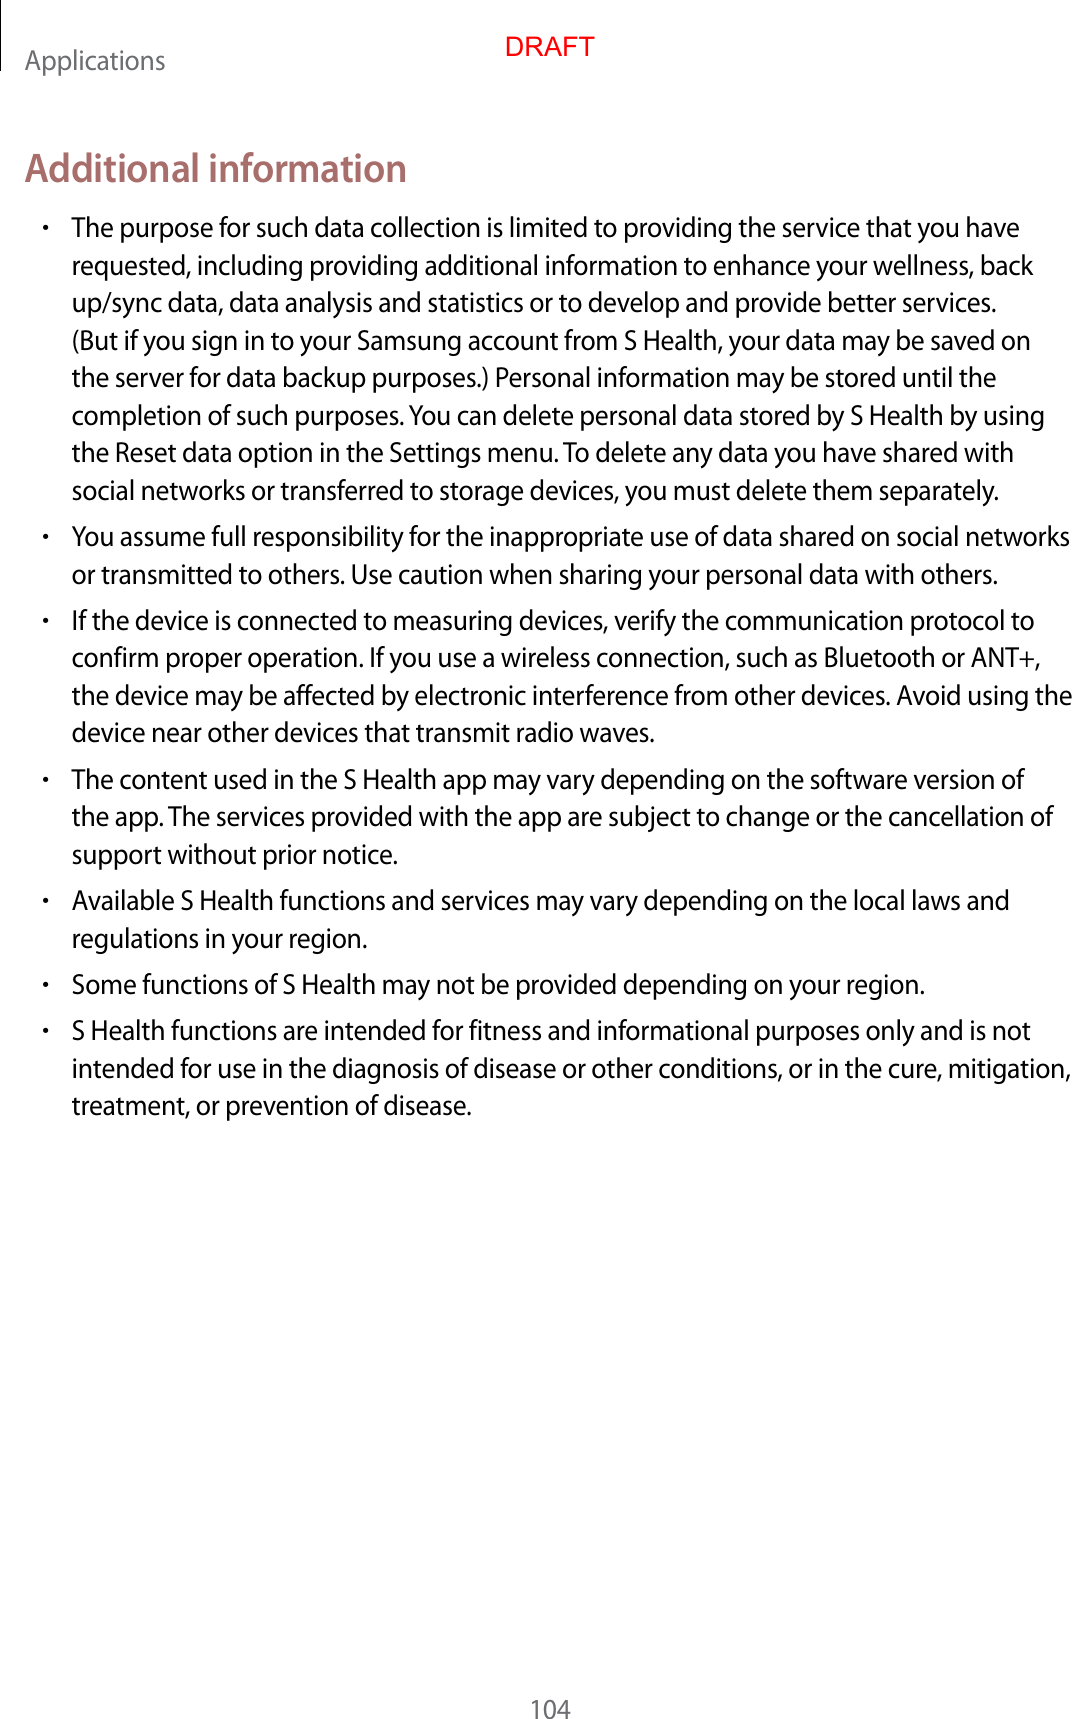 Applications104Additional information•The purpose for such data collection is limited to providing the service that you have requested, including providing additional information to enhance your wellness, back up/sync data, data analysis and statistics or to develop and provide better services. (But if you sign in to your Samsung account from S Health, your data may be saved on the server for data backup purposes.) Personal information may be stored until the completion of such purposes. You can delete personal data stored by S Health by using the Reset data option in the Settings menu. To delete any data you have shared with social networks or transferred to storage devices, you must delete them separately.•You assume full responsibility for the inappropriate use of data shared on social networks or transmitted to others. Use caution when sharing your personal data with others.•If the device is connected to measuring devices, verify the communication protocol to confirm proper operation. If you use a wireless connection, such as Bluetooth or ANT+, the device may be affected by electronic interference from other devices. Avoid using the device near other devices that transmit radio waves.•The content used in the S Health app may vary depending on the software version of the app. The services provided with the app are subject to change or the cancellation of support without prior notice.•Available S Health functions and services may vary depending on the local laws and regulations in your region.•Some functions of S Health may not be provided depending on your region.•S Health functions are intended for fitness and informational purposes only and is not intended for use in the diagnosis of disease or other conditions, or in the cure, mitigation, treatment, or prevention of disease.DRAFT